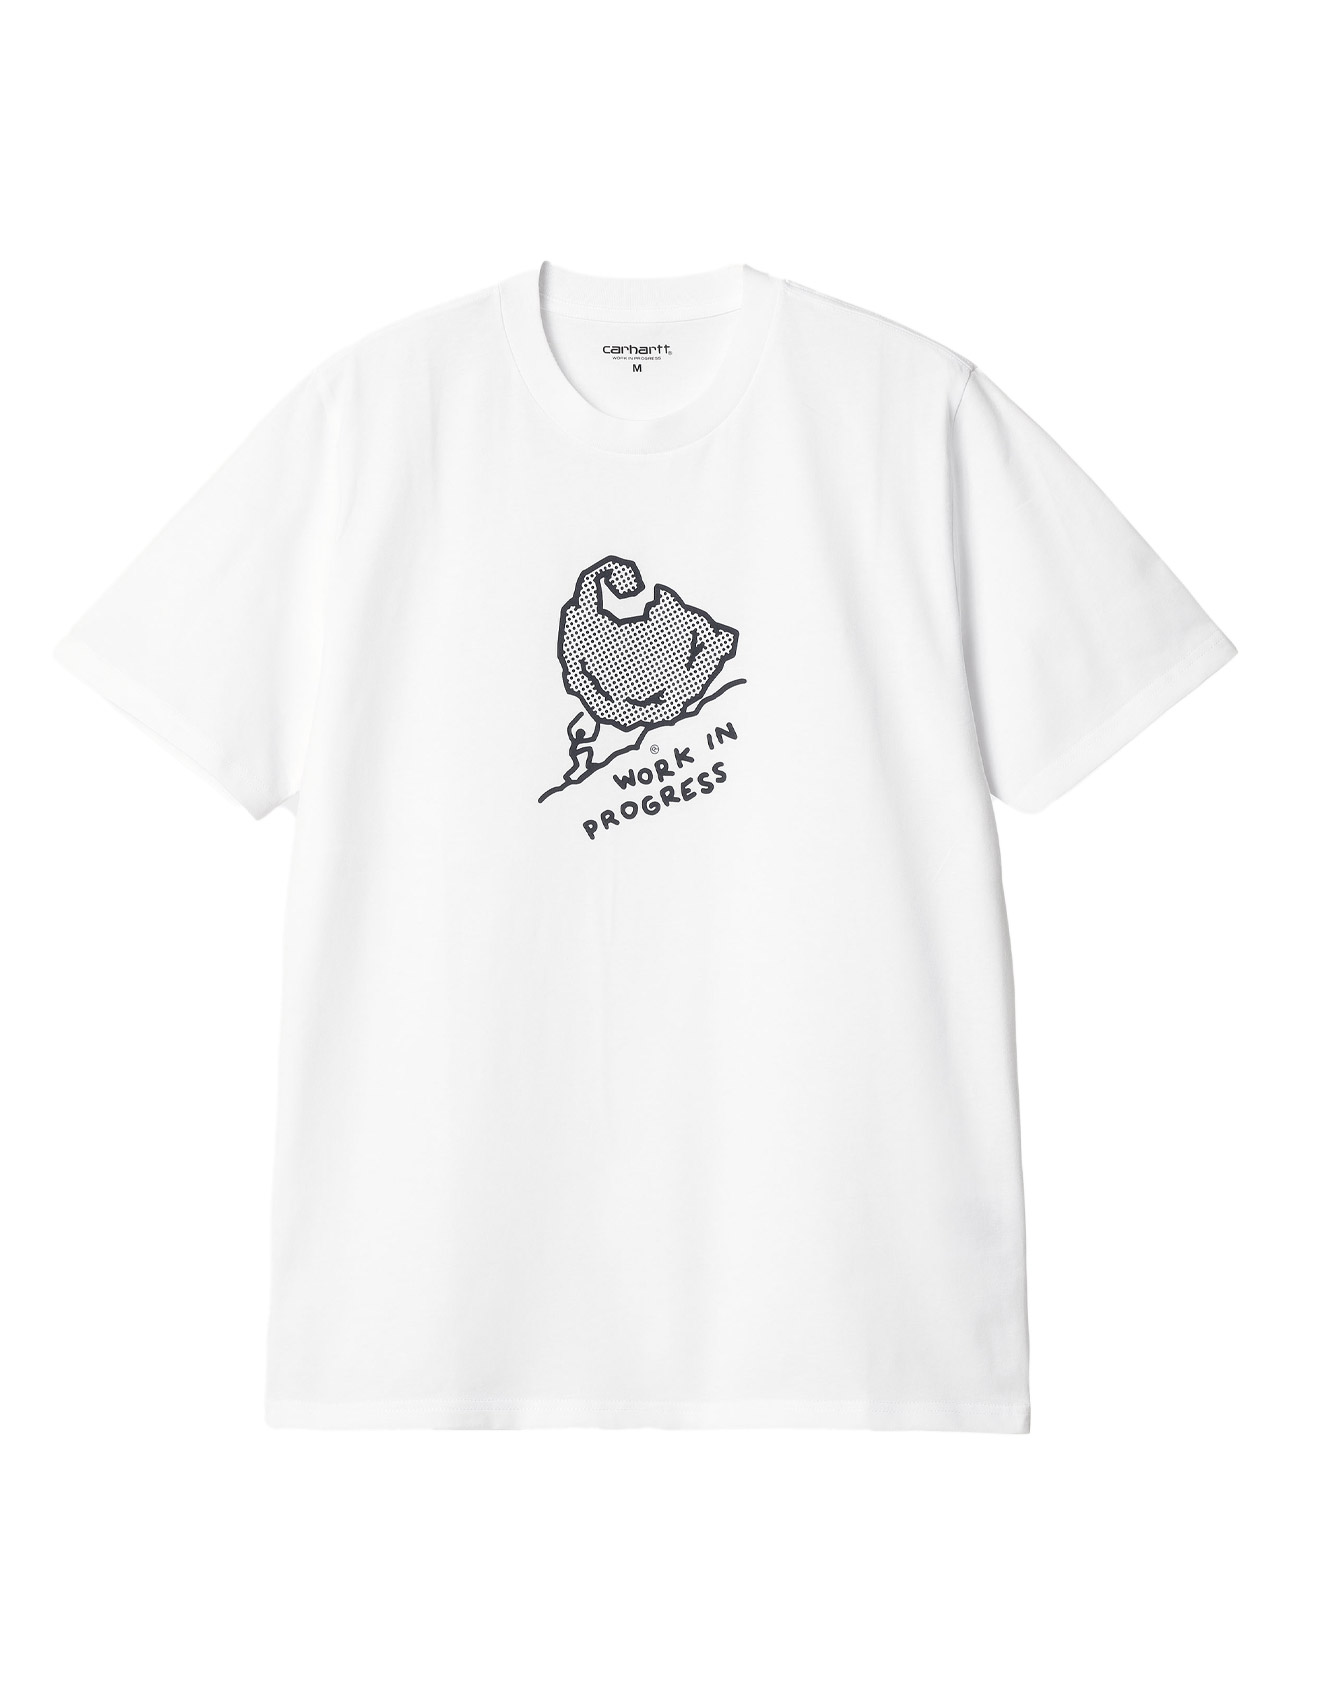 Carhartt WIP – S/S Move On Up T-Shirt